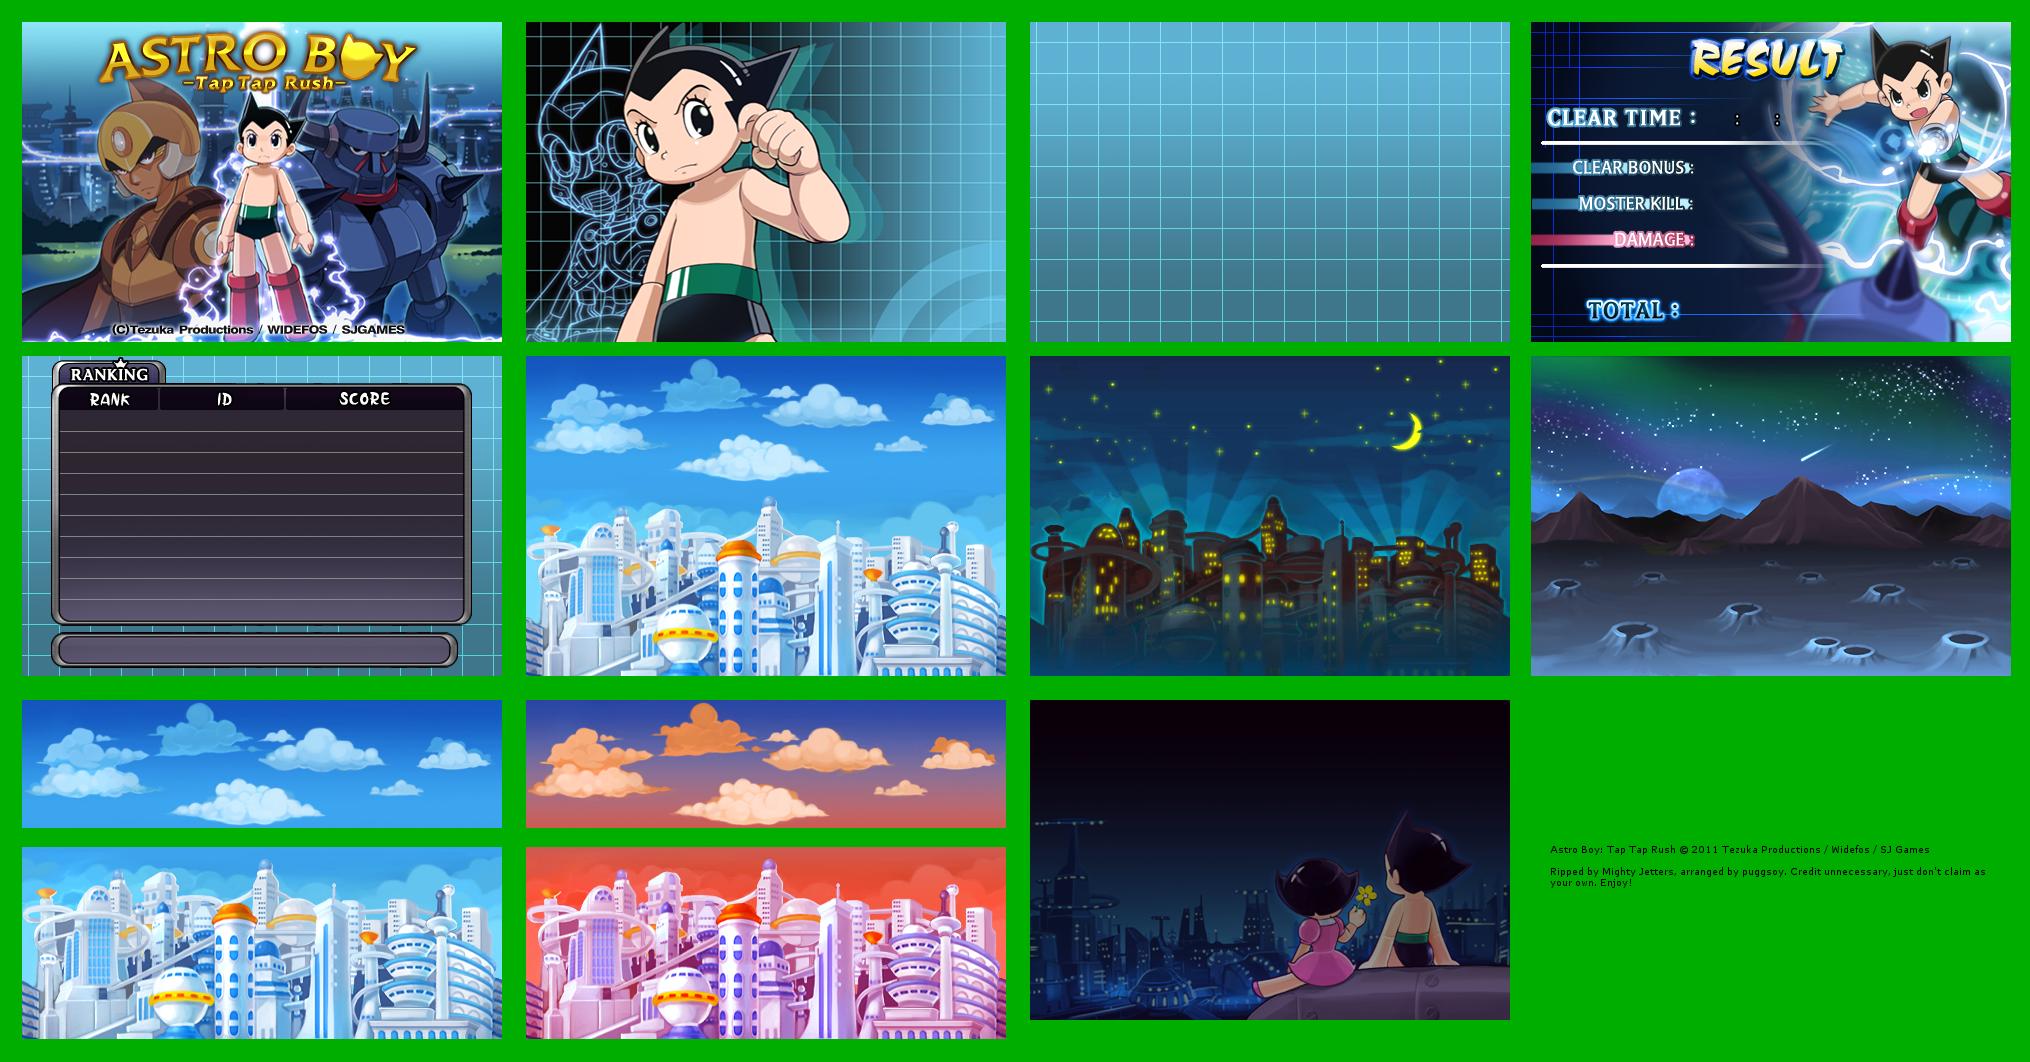 Astro Boy: Tap Tap Rush - Backgrounds